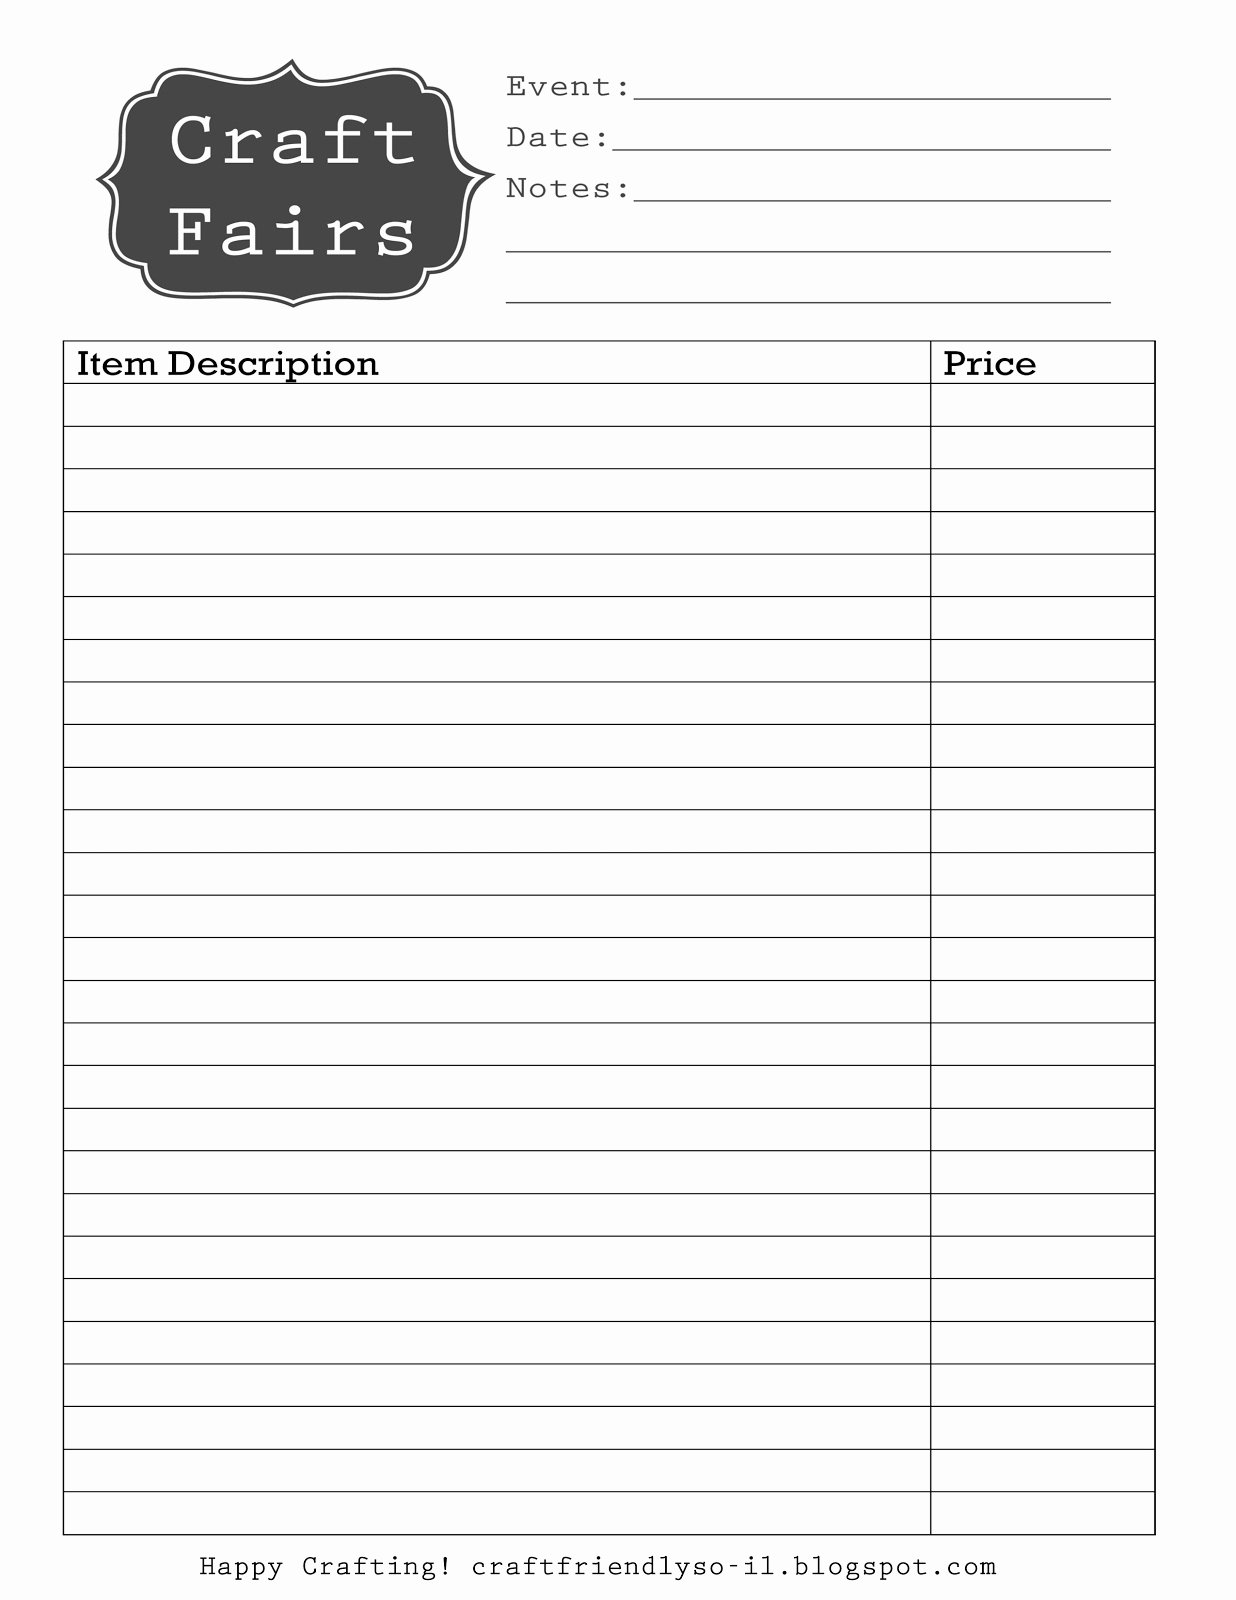 Free Printable Inventory Sheets Fresh Craft Friendly southern Illinois Craft Show and